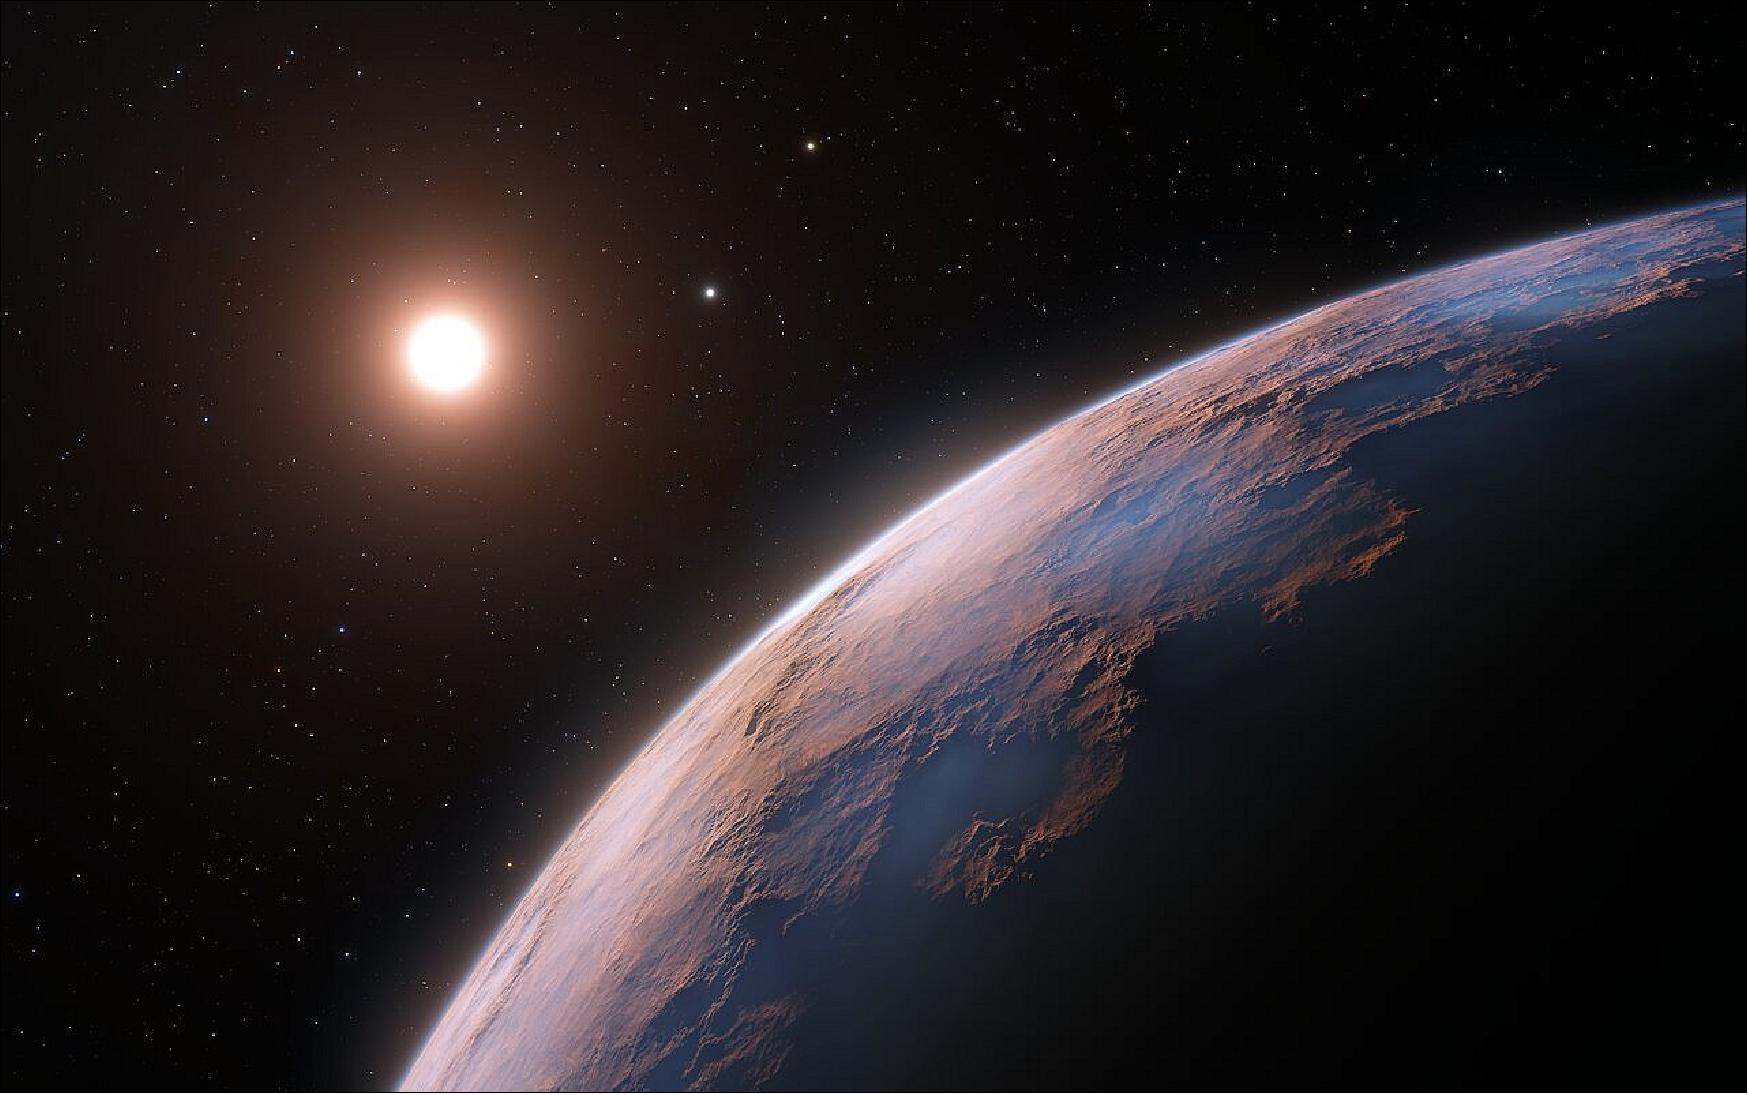 Figure 9: This artist’s impression shows a close-up view of Proxima d, a planet candidate recently found orbiting the red dwarf star Proxima Centauri, the closest star to the Solar System. The planet is believed to be rocky and to have a mass about a quarter that of Earth. Two other planets known to orbit Proxima Centauri are visible in the image too: Proxima b, a planet with about the same mass as Earth that orbits the star every 11 days and is within the habitable zone, and candidate Proxima c, which is on a longer five-year orbit around the star (image credit: ESO, L. Calçada)